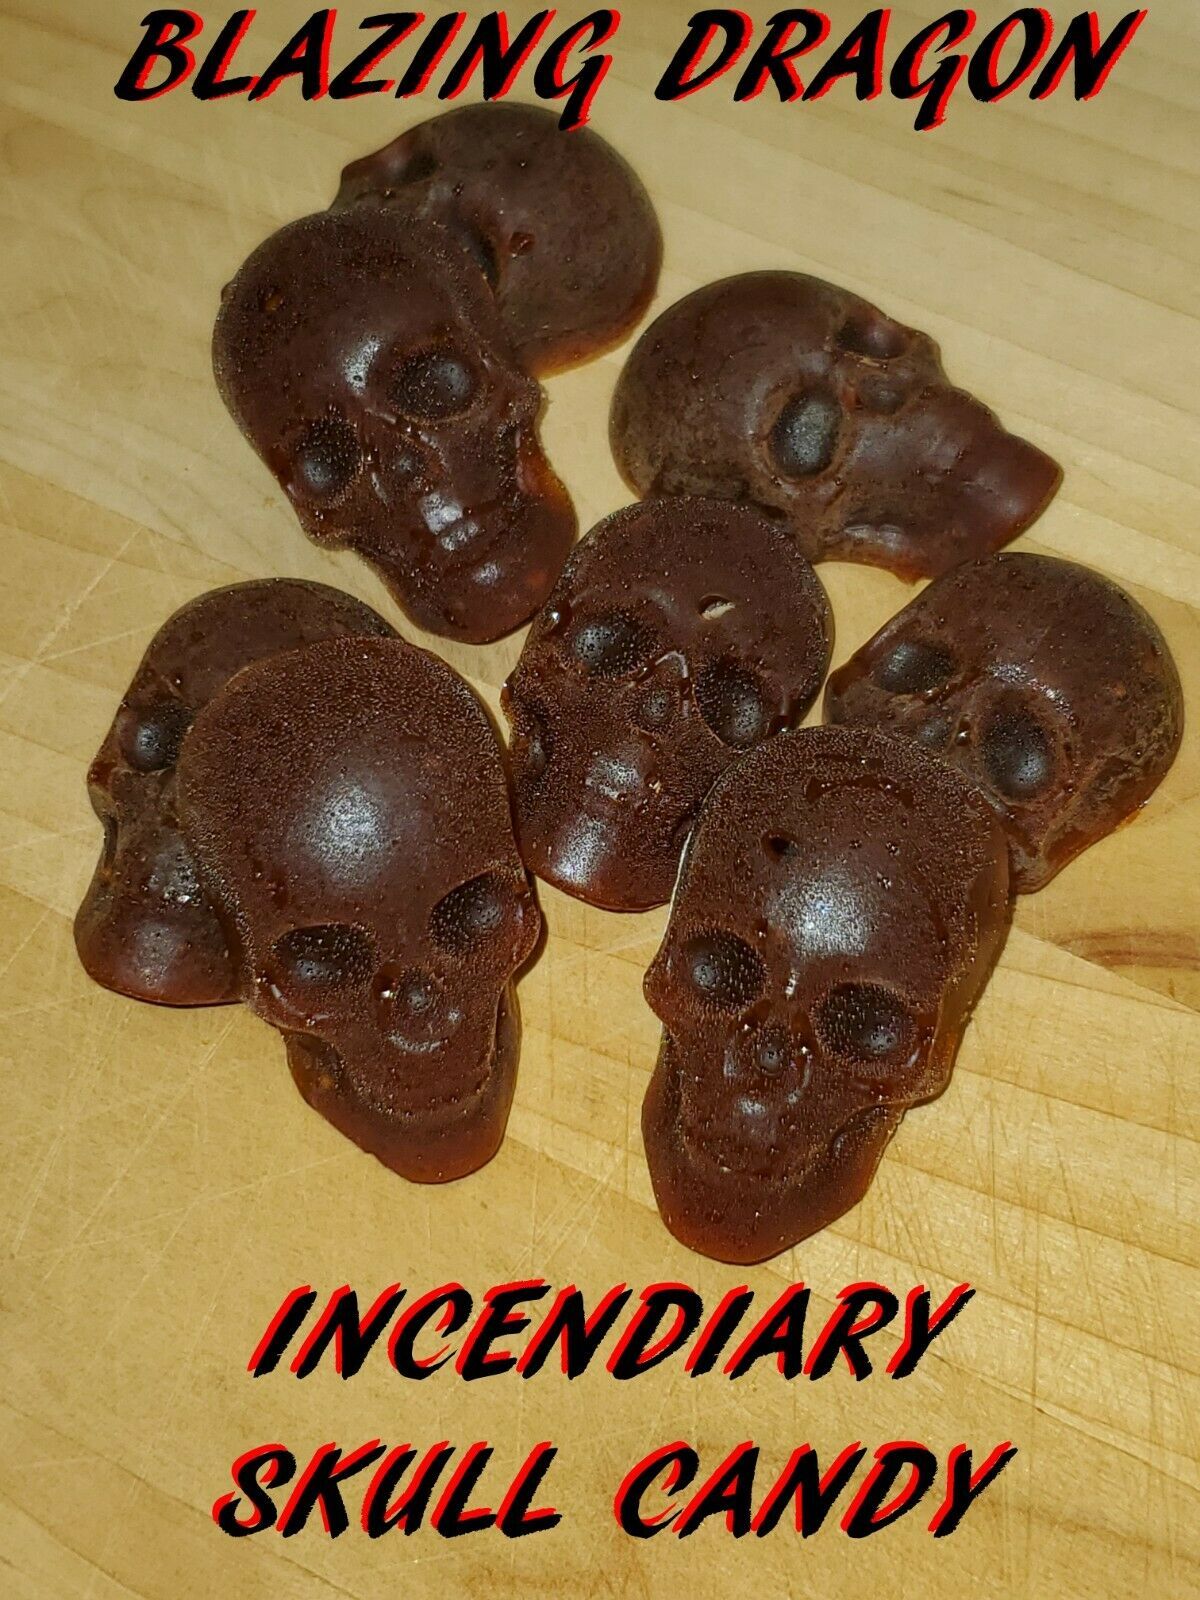 INCENDIARY Skull Candy-Made to hurt and Howling hot! Extremely hot Candy. - $8.50 - $42.50